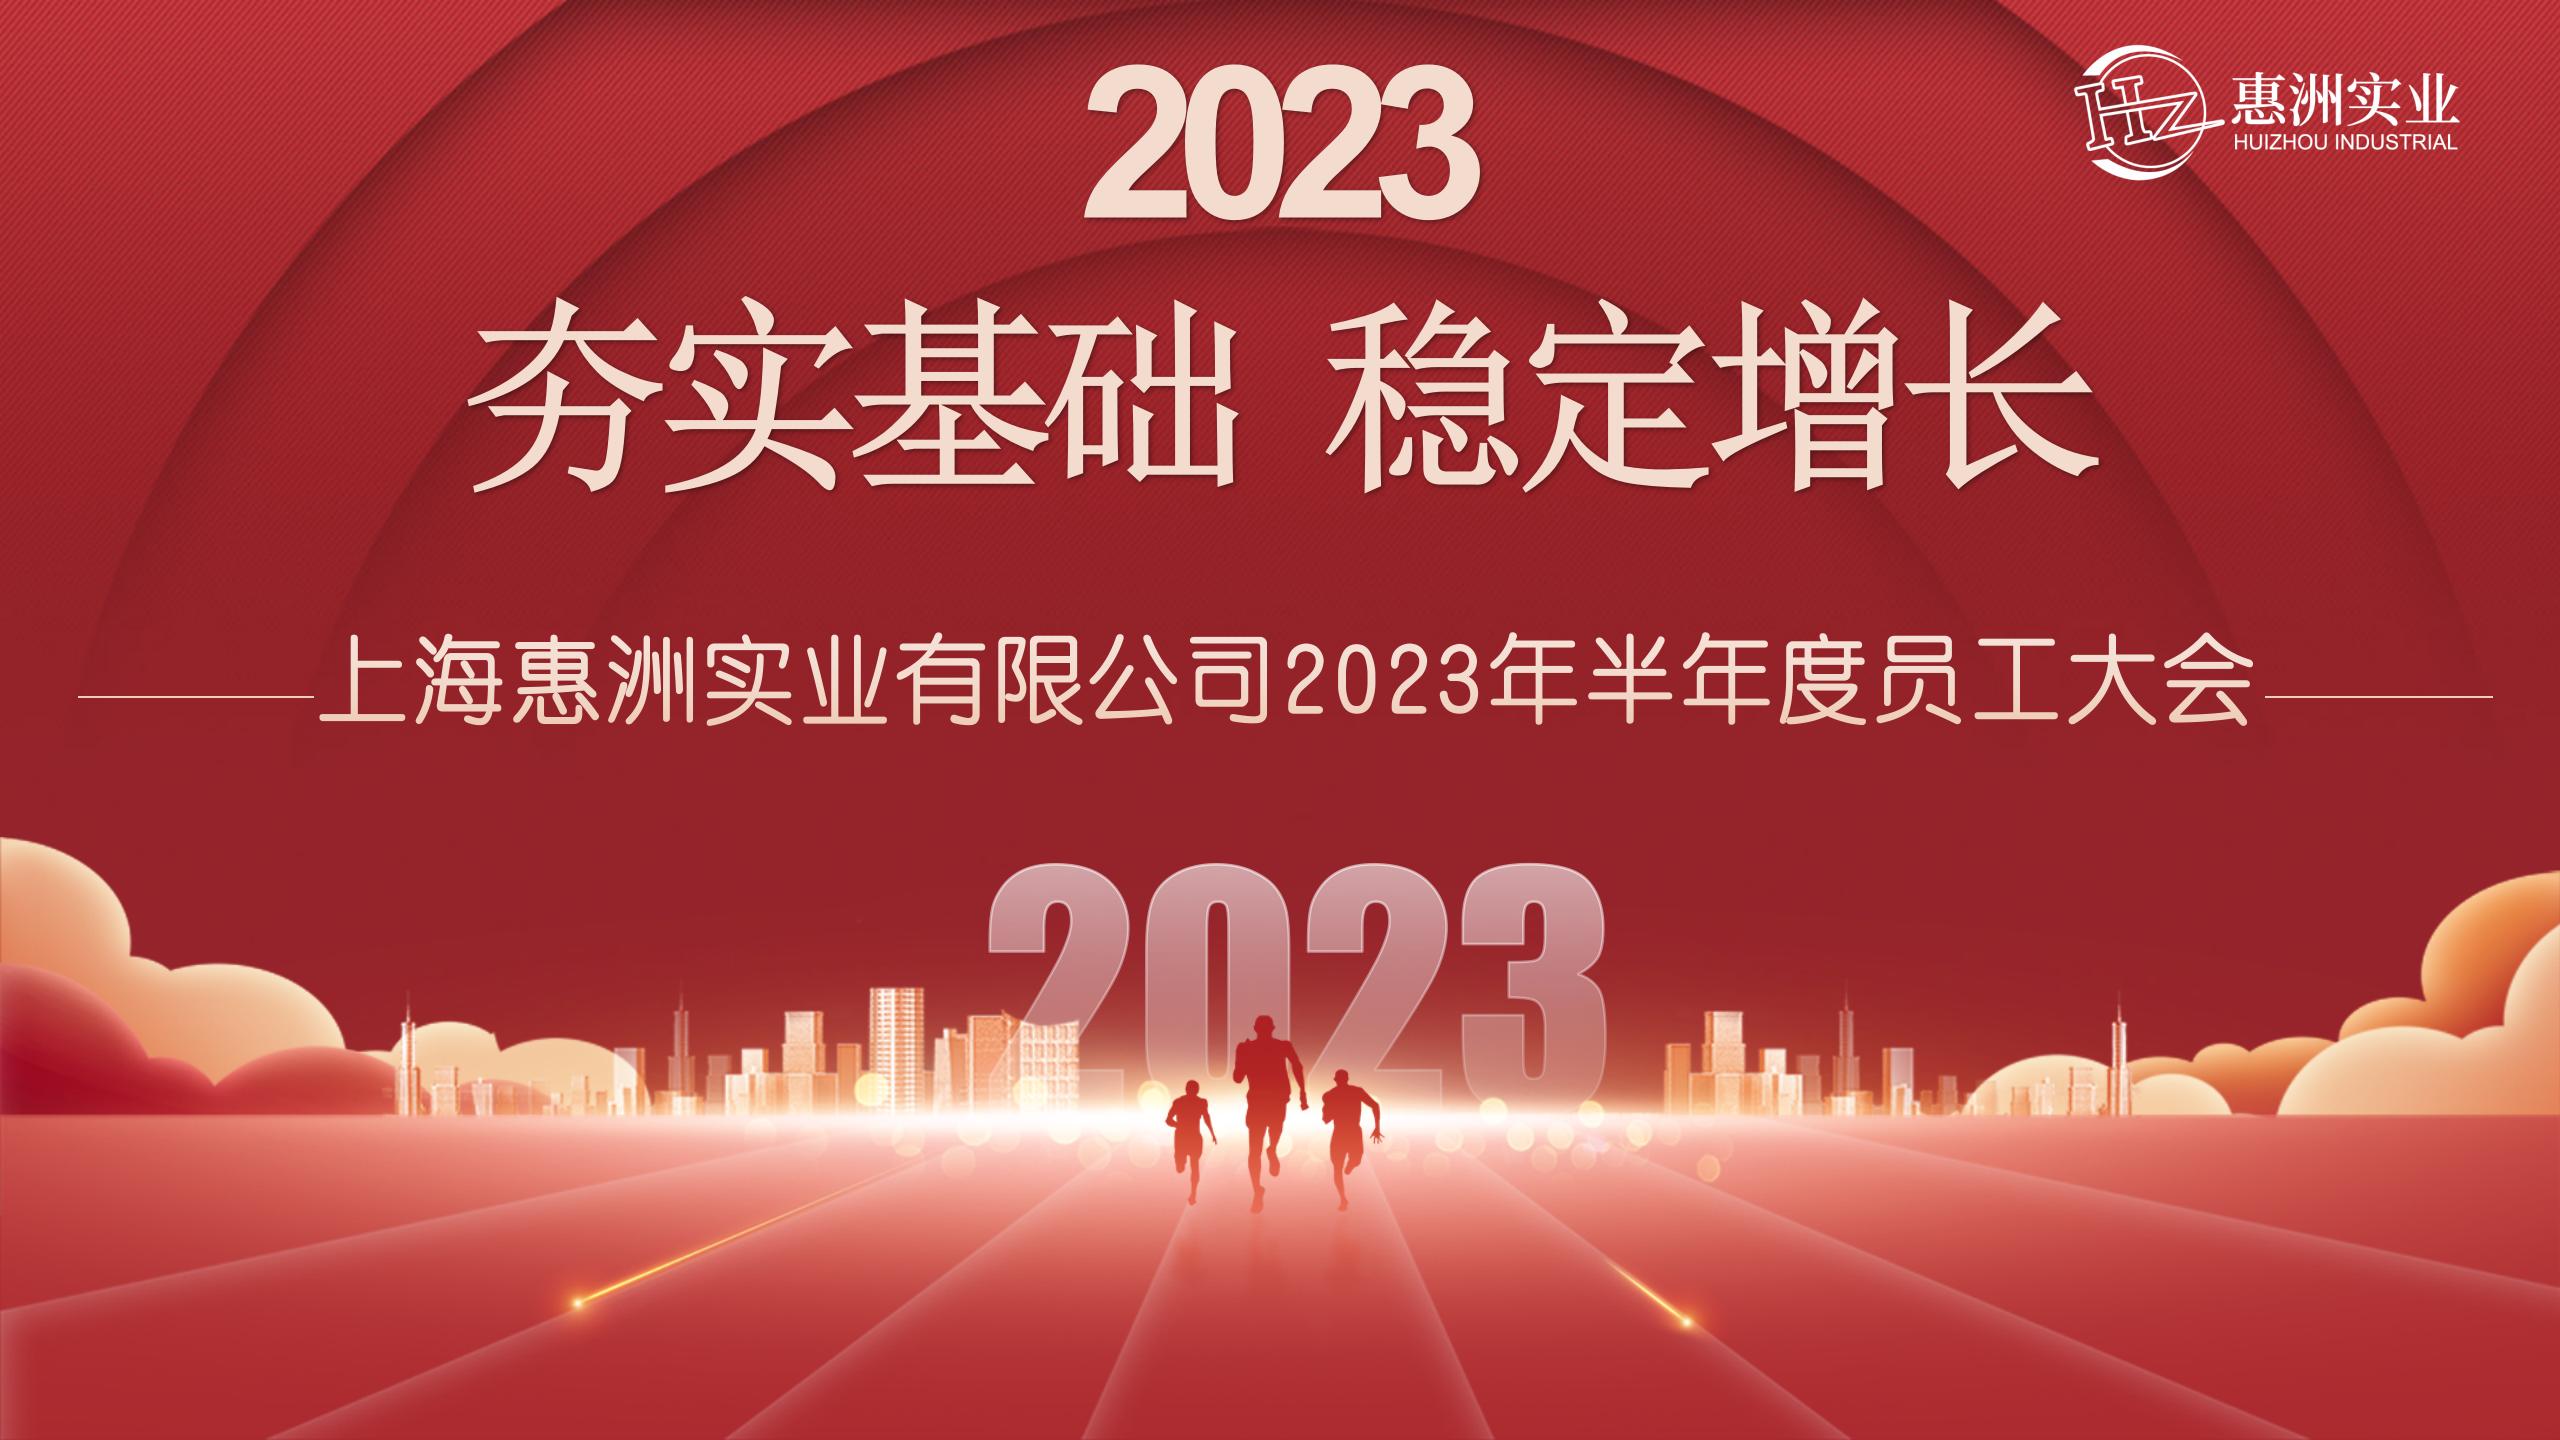 Huizhou Semi-annual Staff Meeting 2023 | “Foundation, Stable Growth”